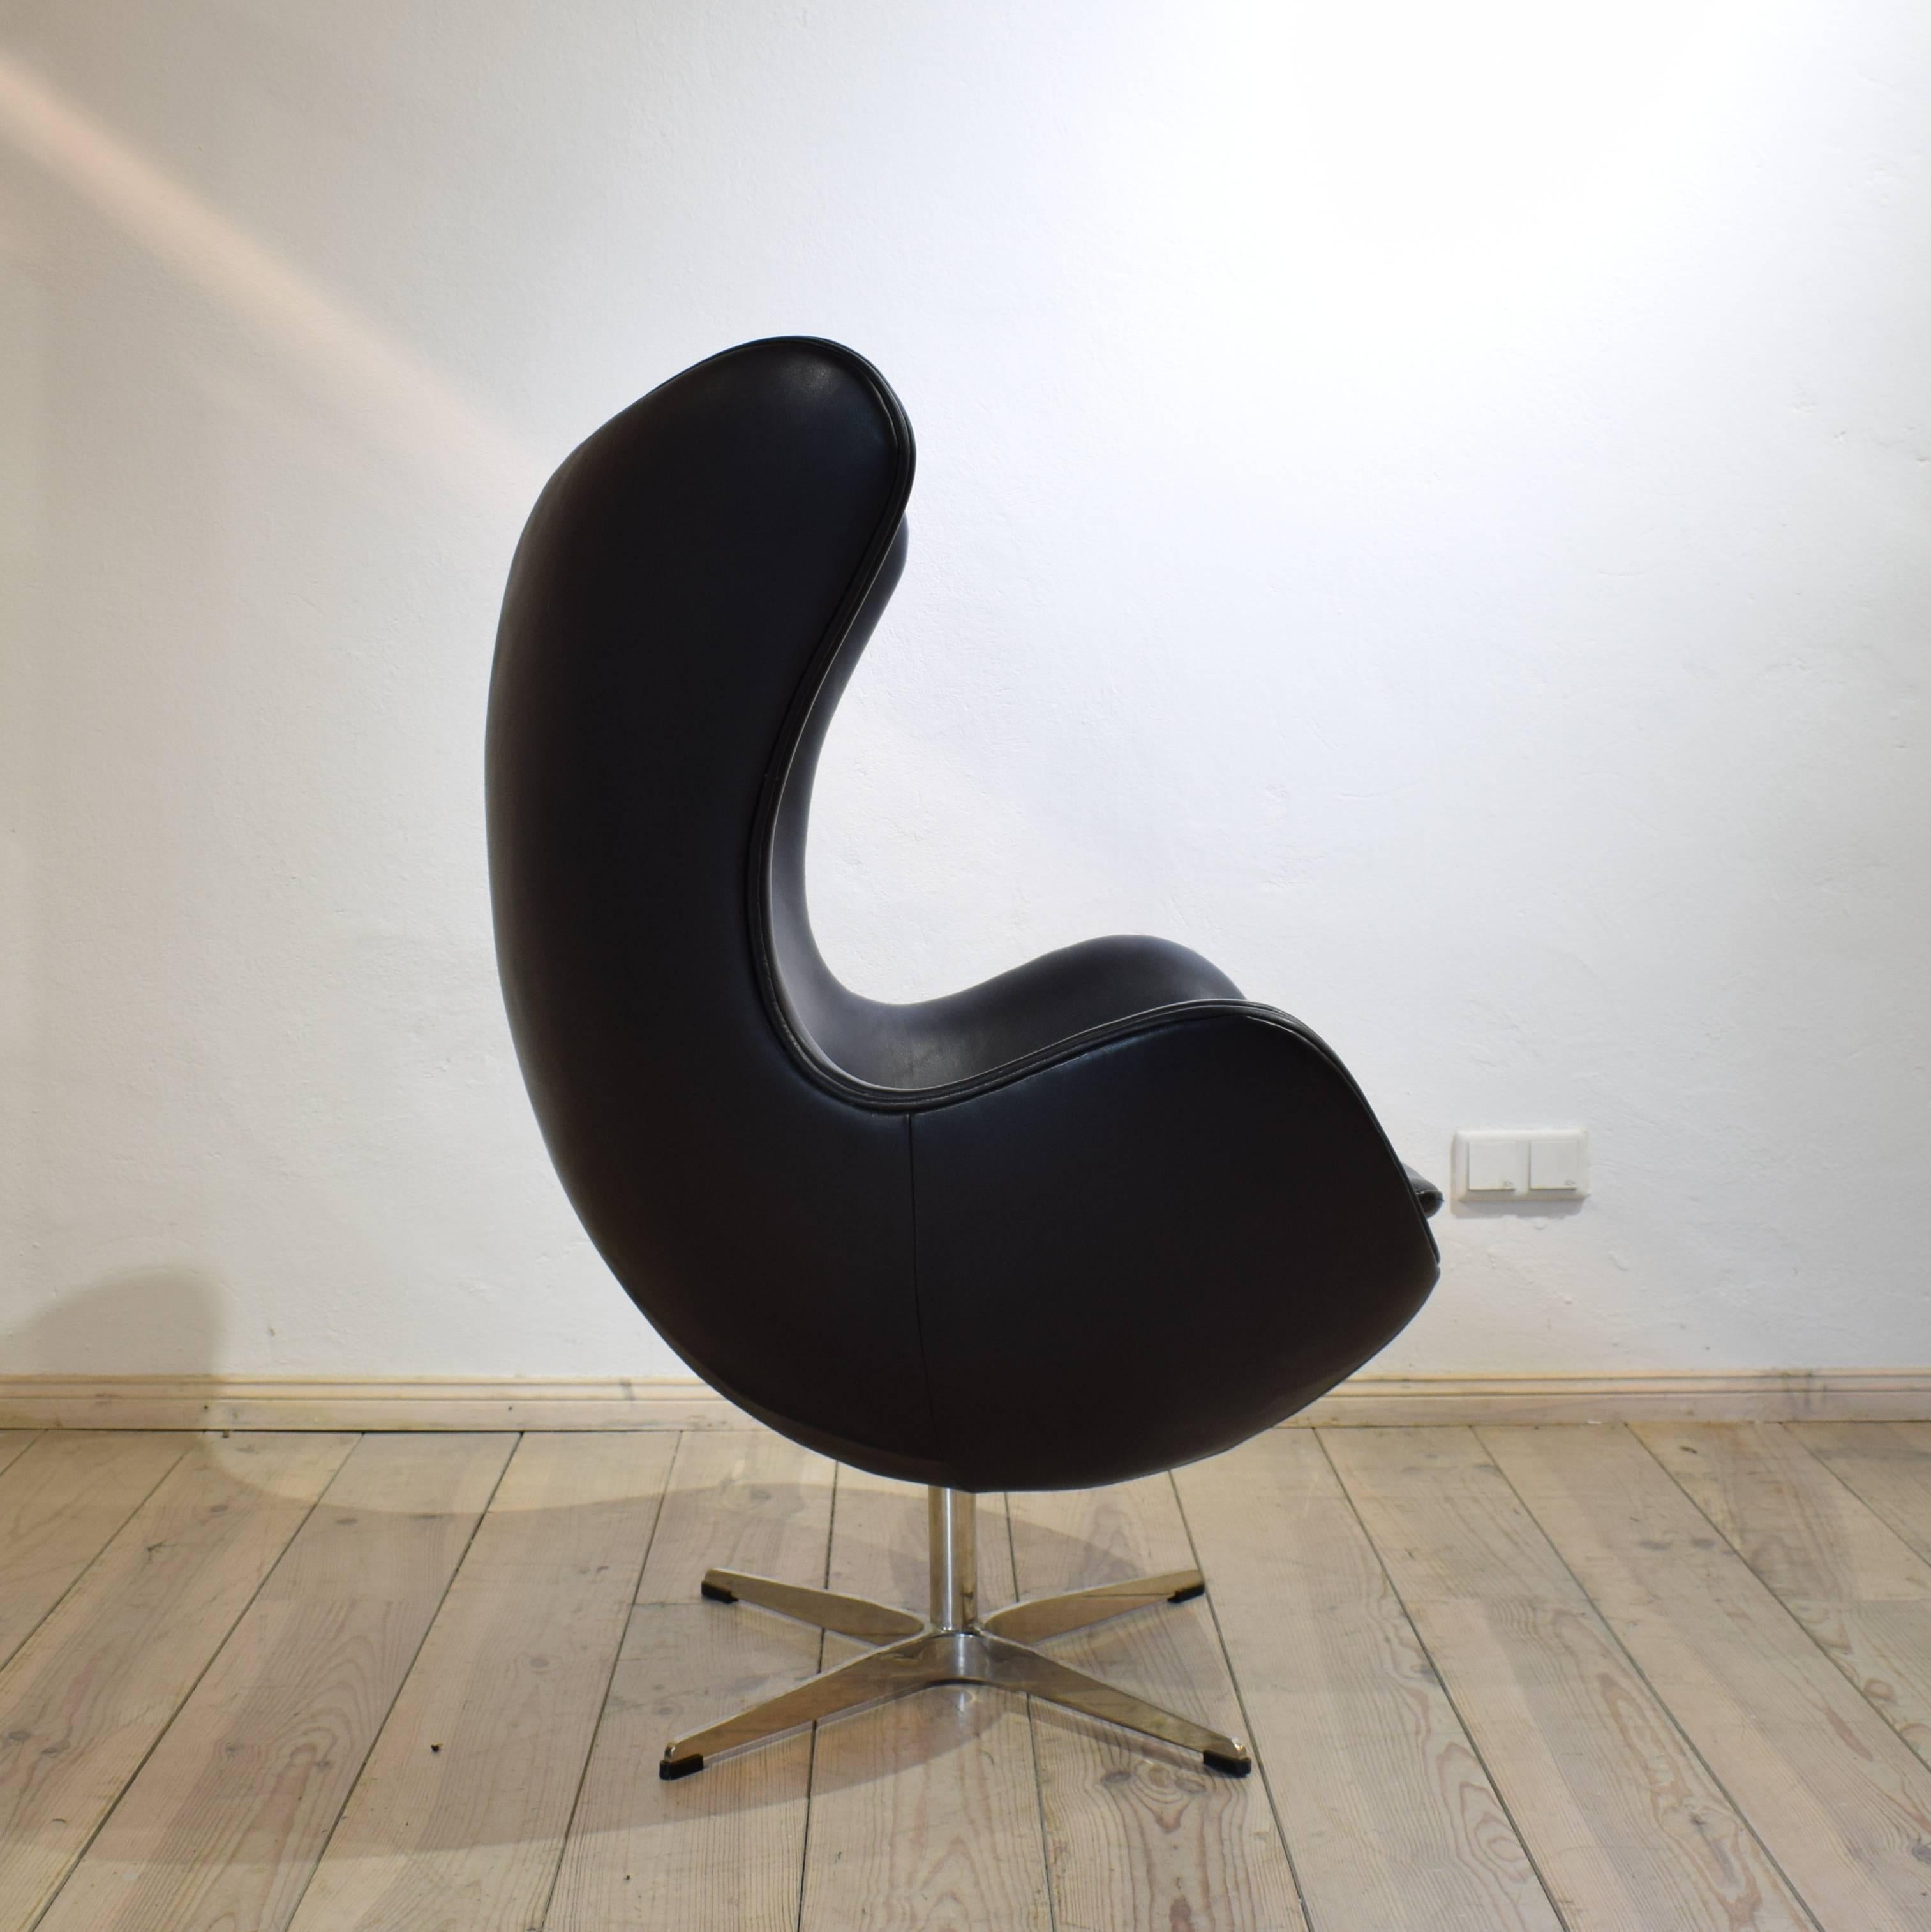 European Midcentury Black Leather Egg Chair in the Style of Arne Jacobsen